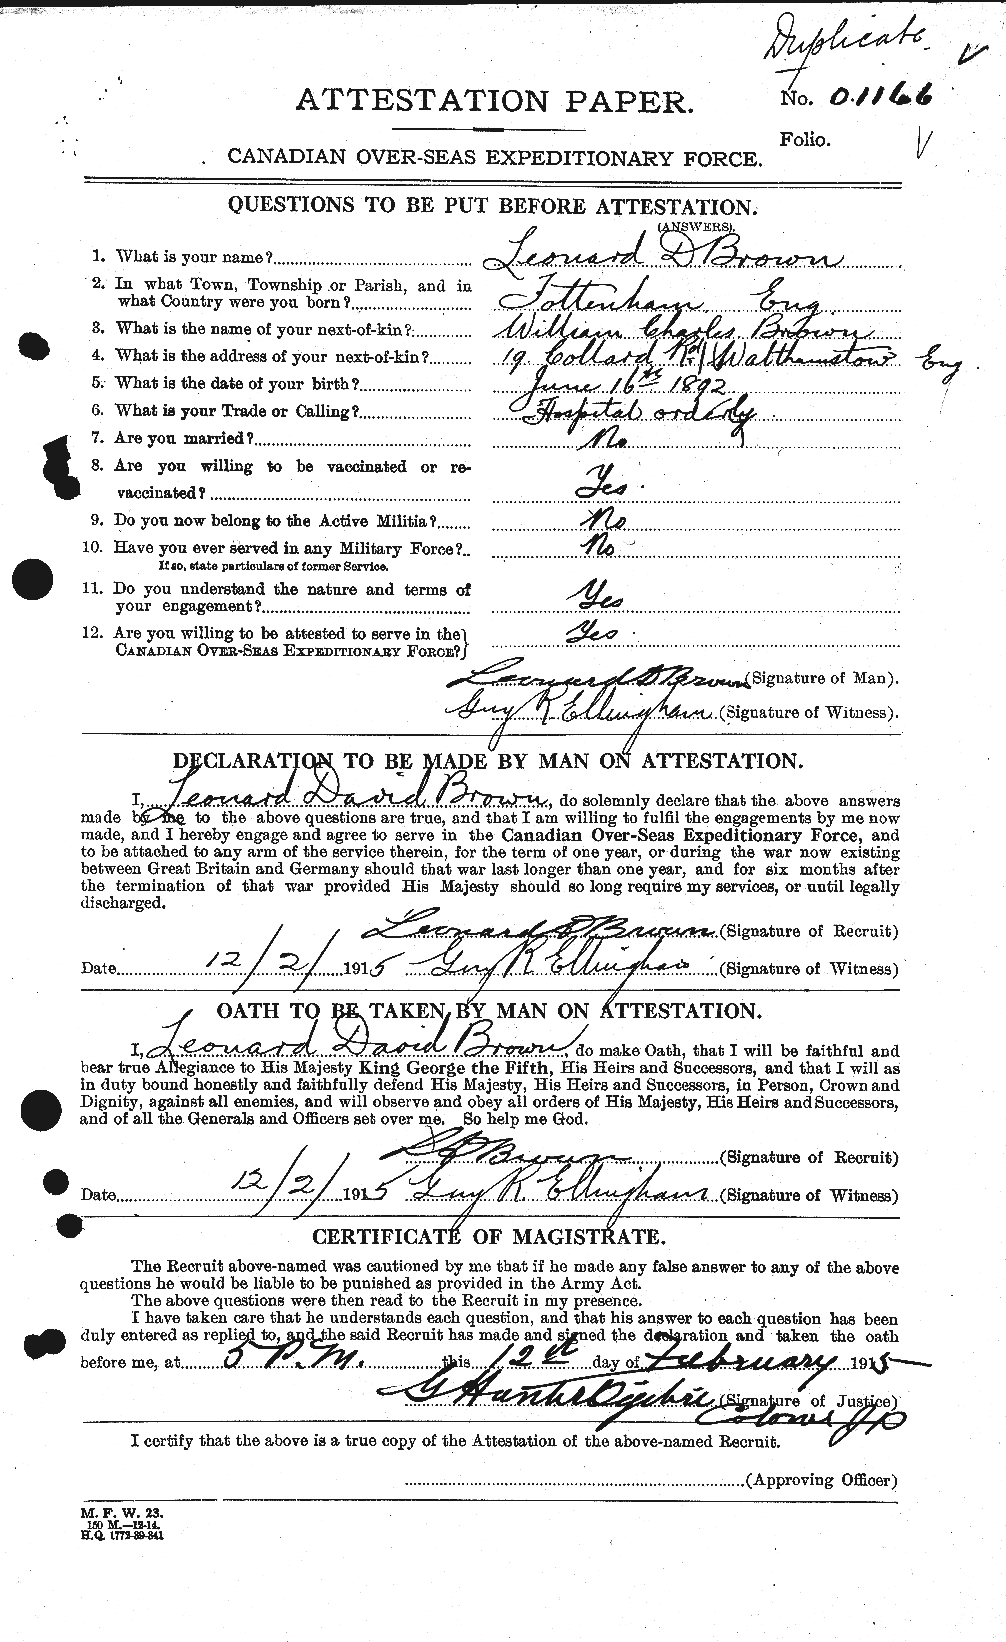 Personnel Records of the First World War - CEF 266294a